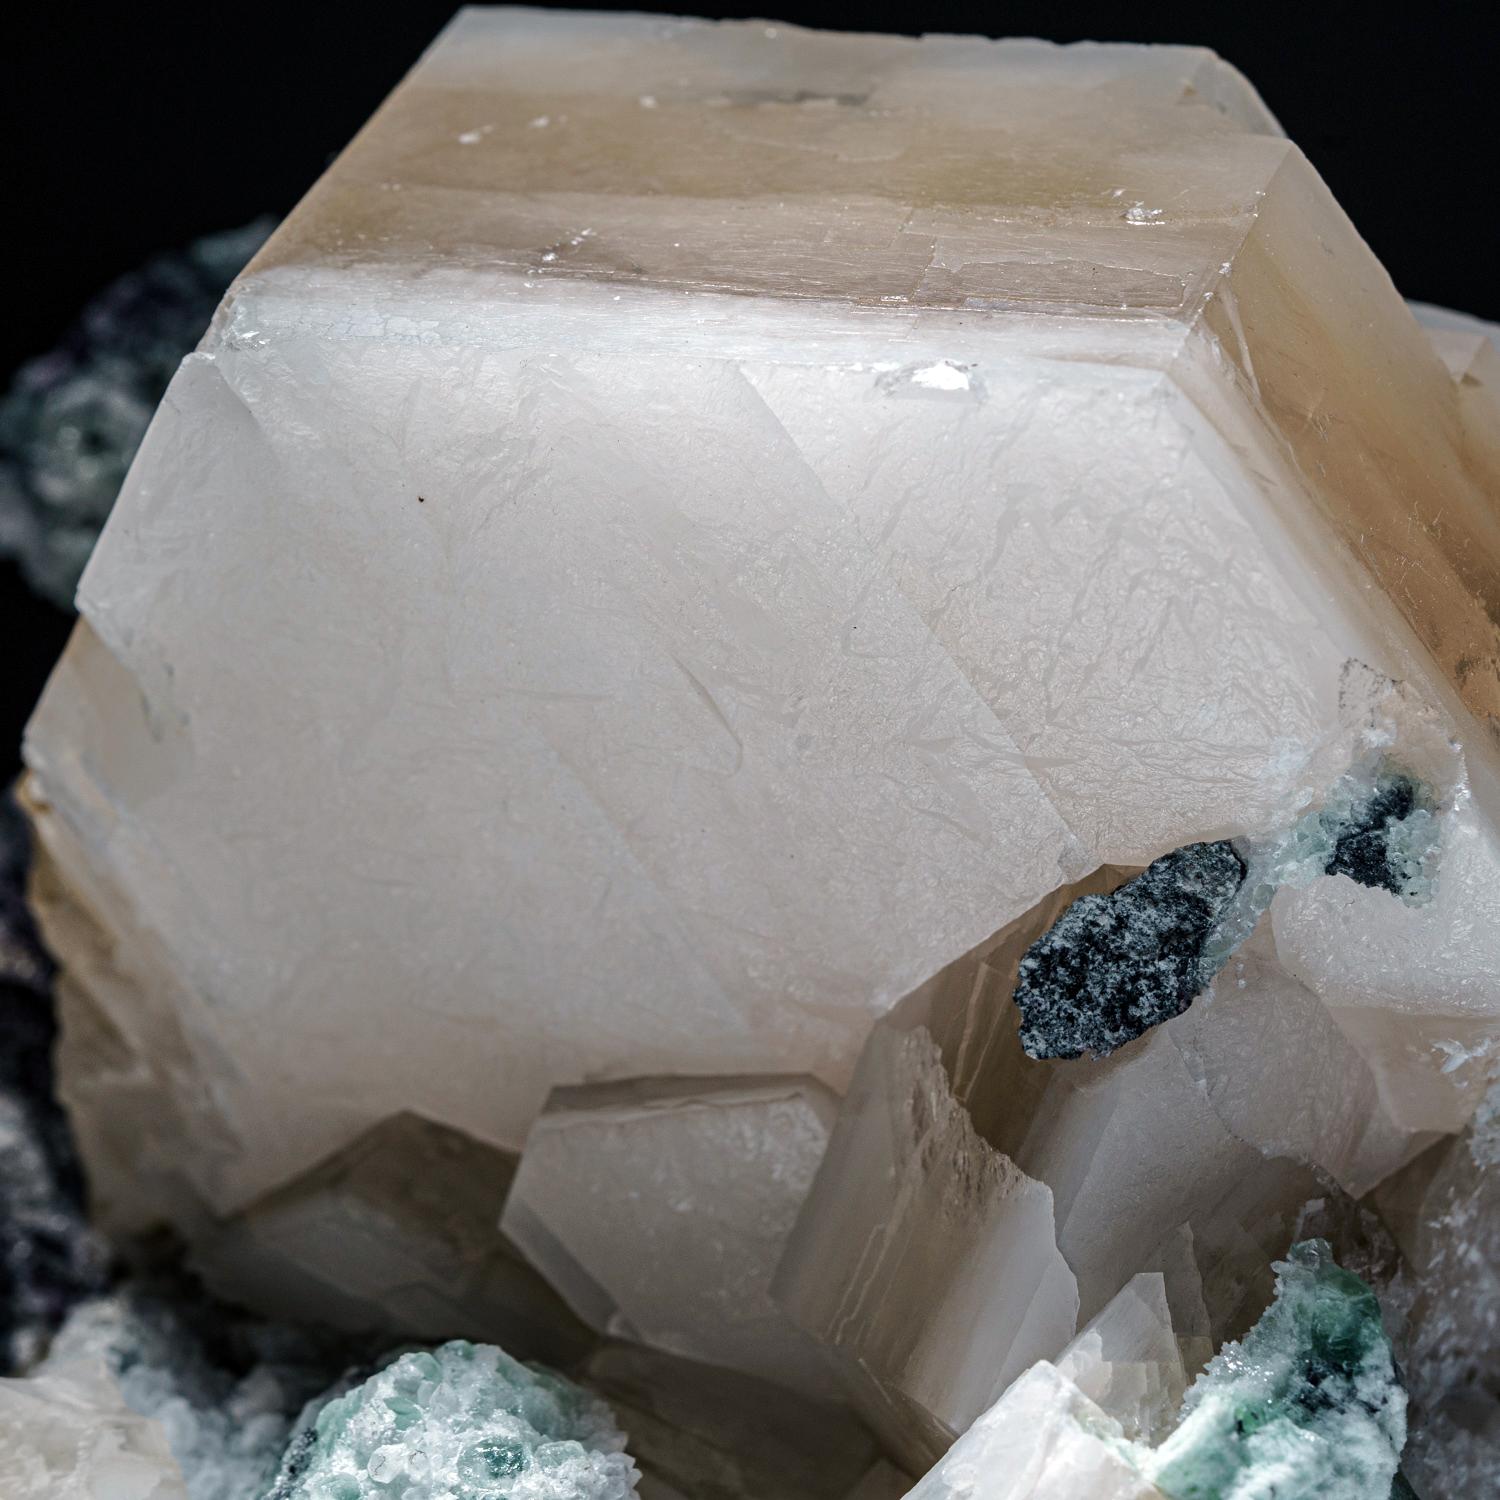 From Huanggang Mine, Kèshíkèténg Qí, Chifeng, Inner Mongolia, China

Lustrous translucent gray-white with transparent colorless calcite crystals.

Weight: 3.9 lbs, Dimensions: 7 x 4 x 5 inches.